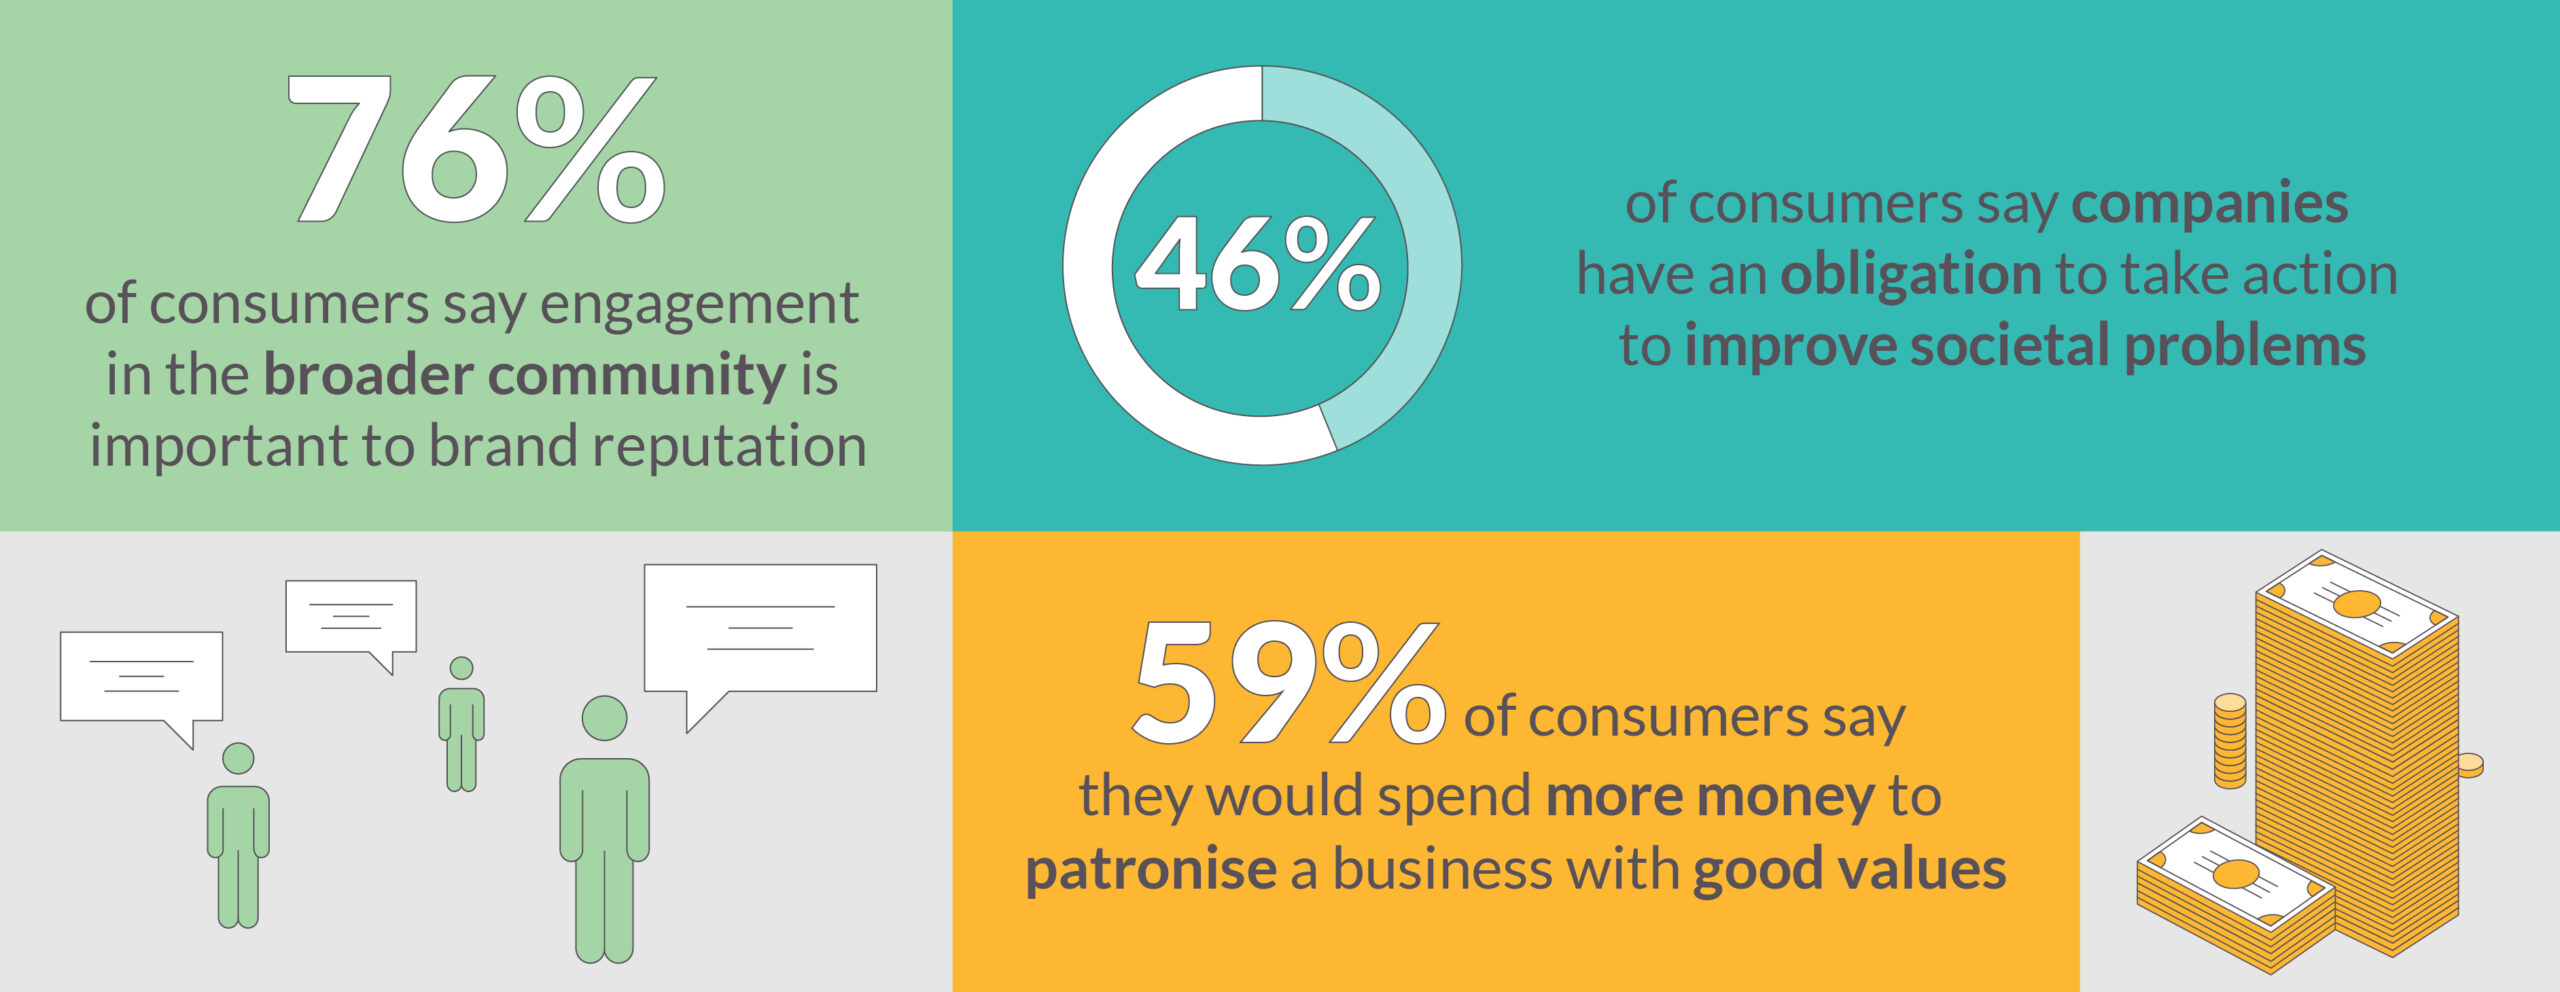 Infographic showing consumers expect positive social impact from organisations